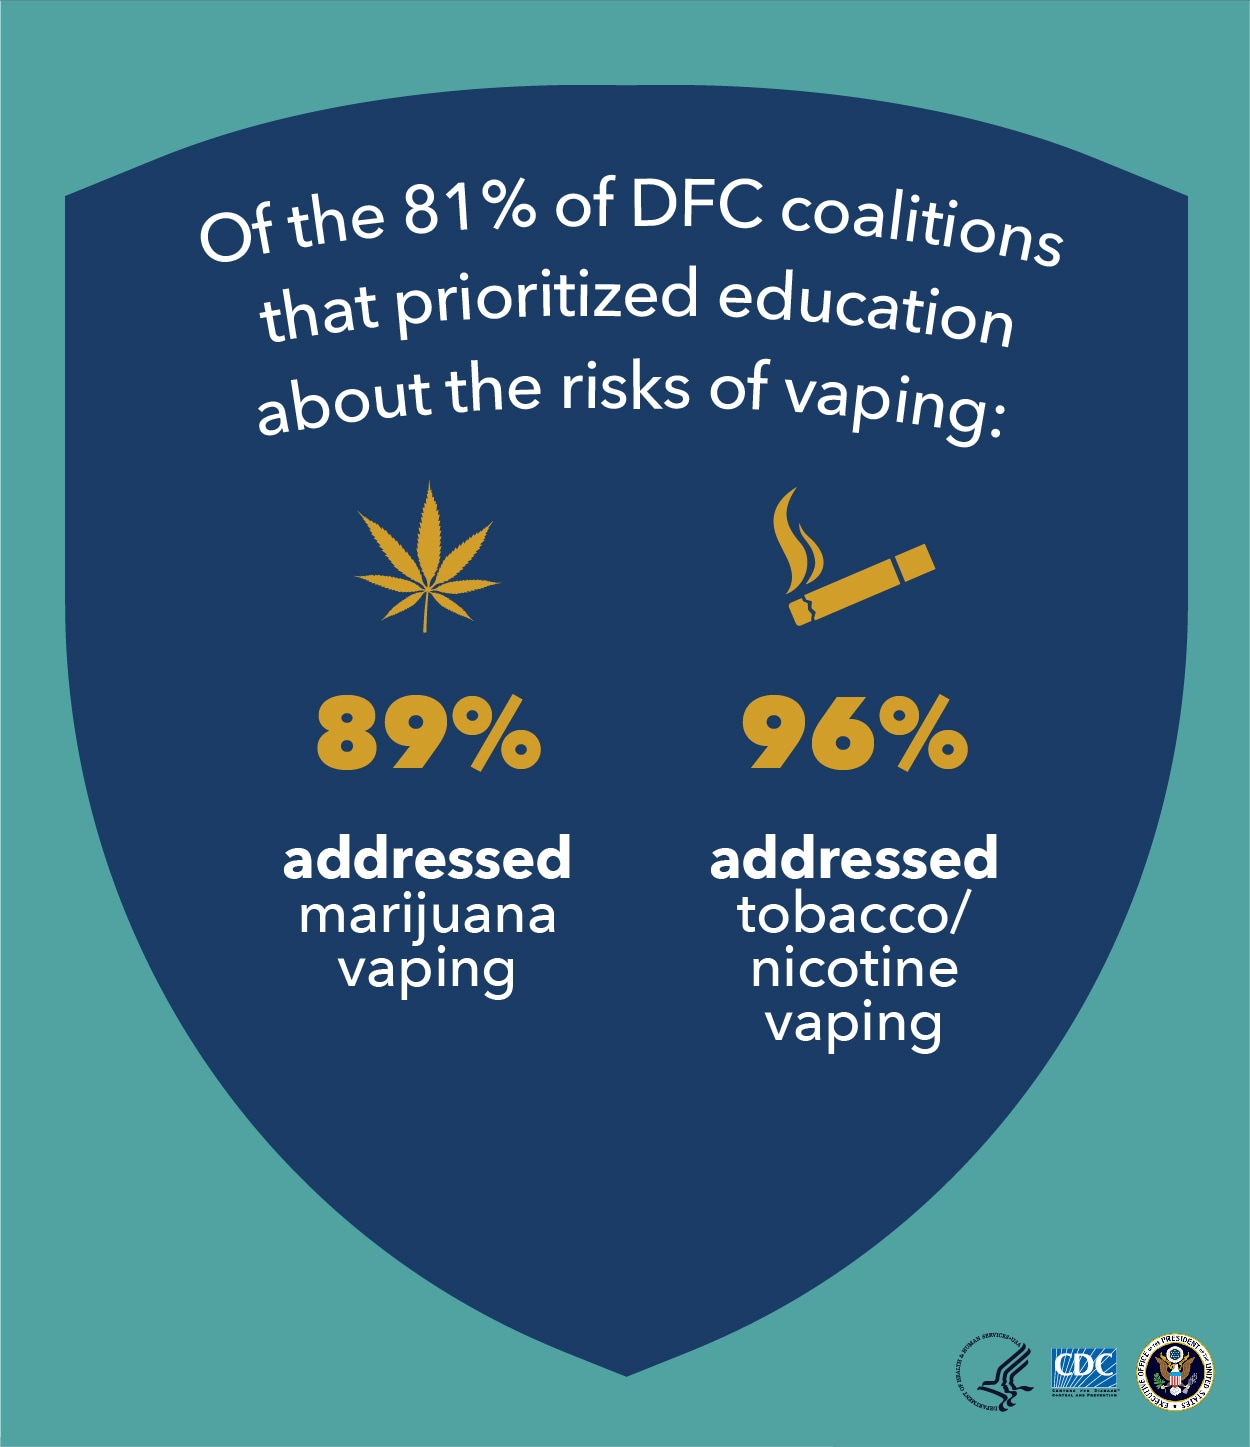 Of the 81% of DFC coalitions that prioritized education about the risks of vaping: 89% addressed marijuana vaping 96% addressed tobacco/ nicotine vaping